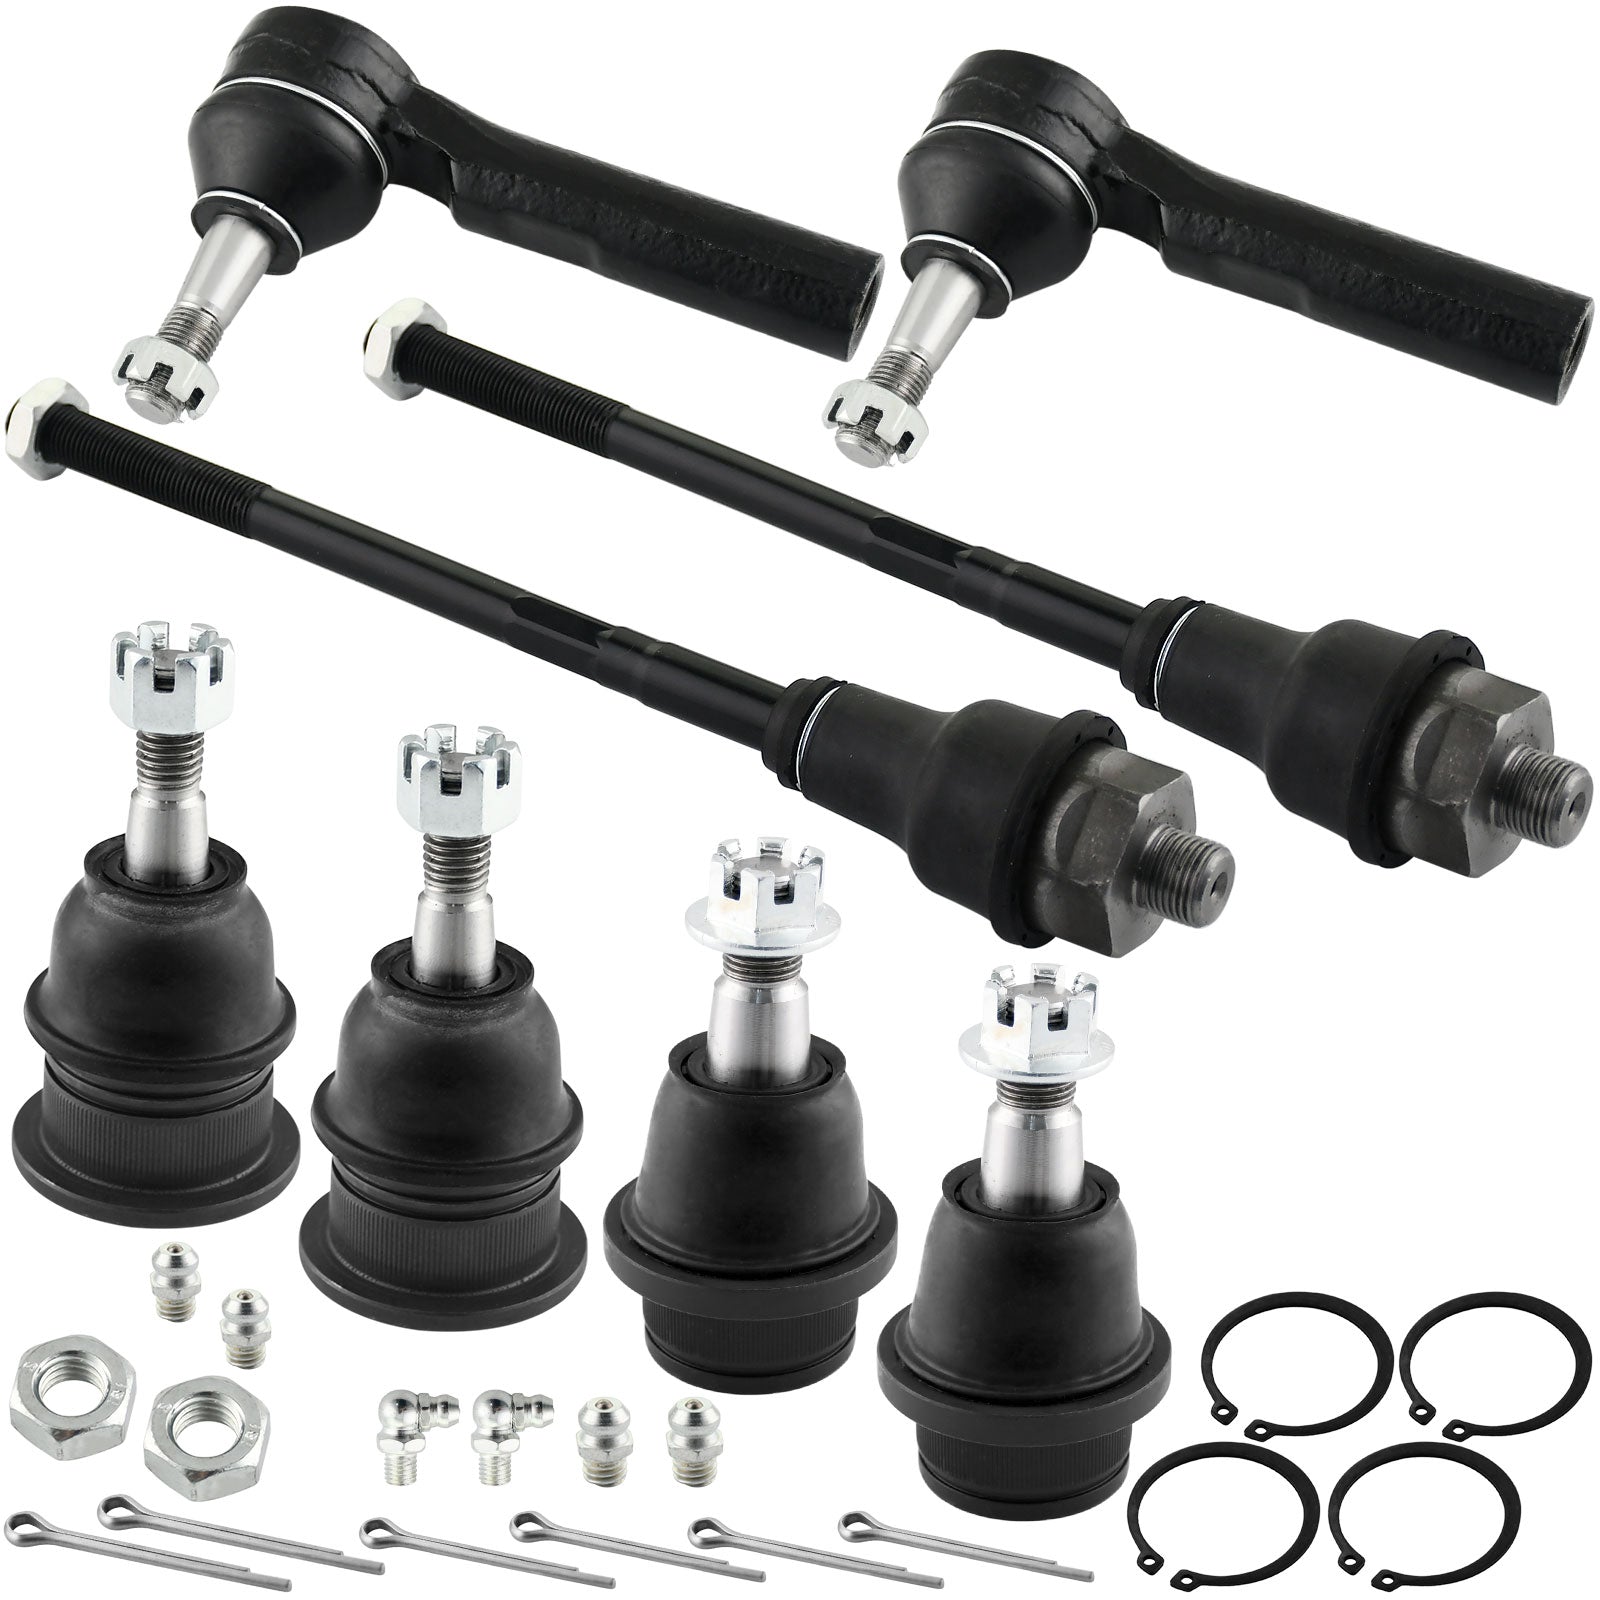 8 Pcs Front Inner and Outer Tie Rod End Link + Front Upper and Lower Ball Joint Kit Fits for Chevrolet Silverado Suburban Avalanche 1500 Tahoe, GMC Sierra 1500 Yukon And XL, Cadillac Escalade ESC EXT MotorbyMotor